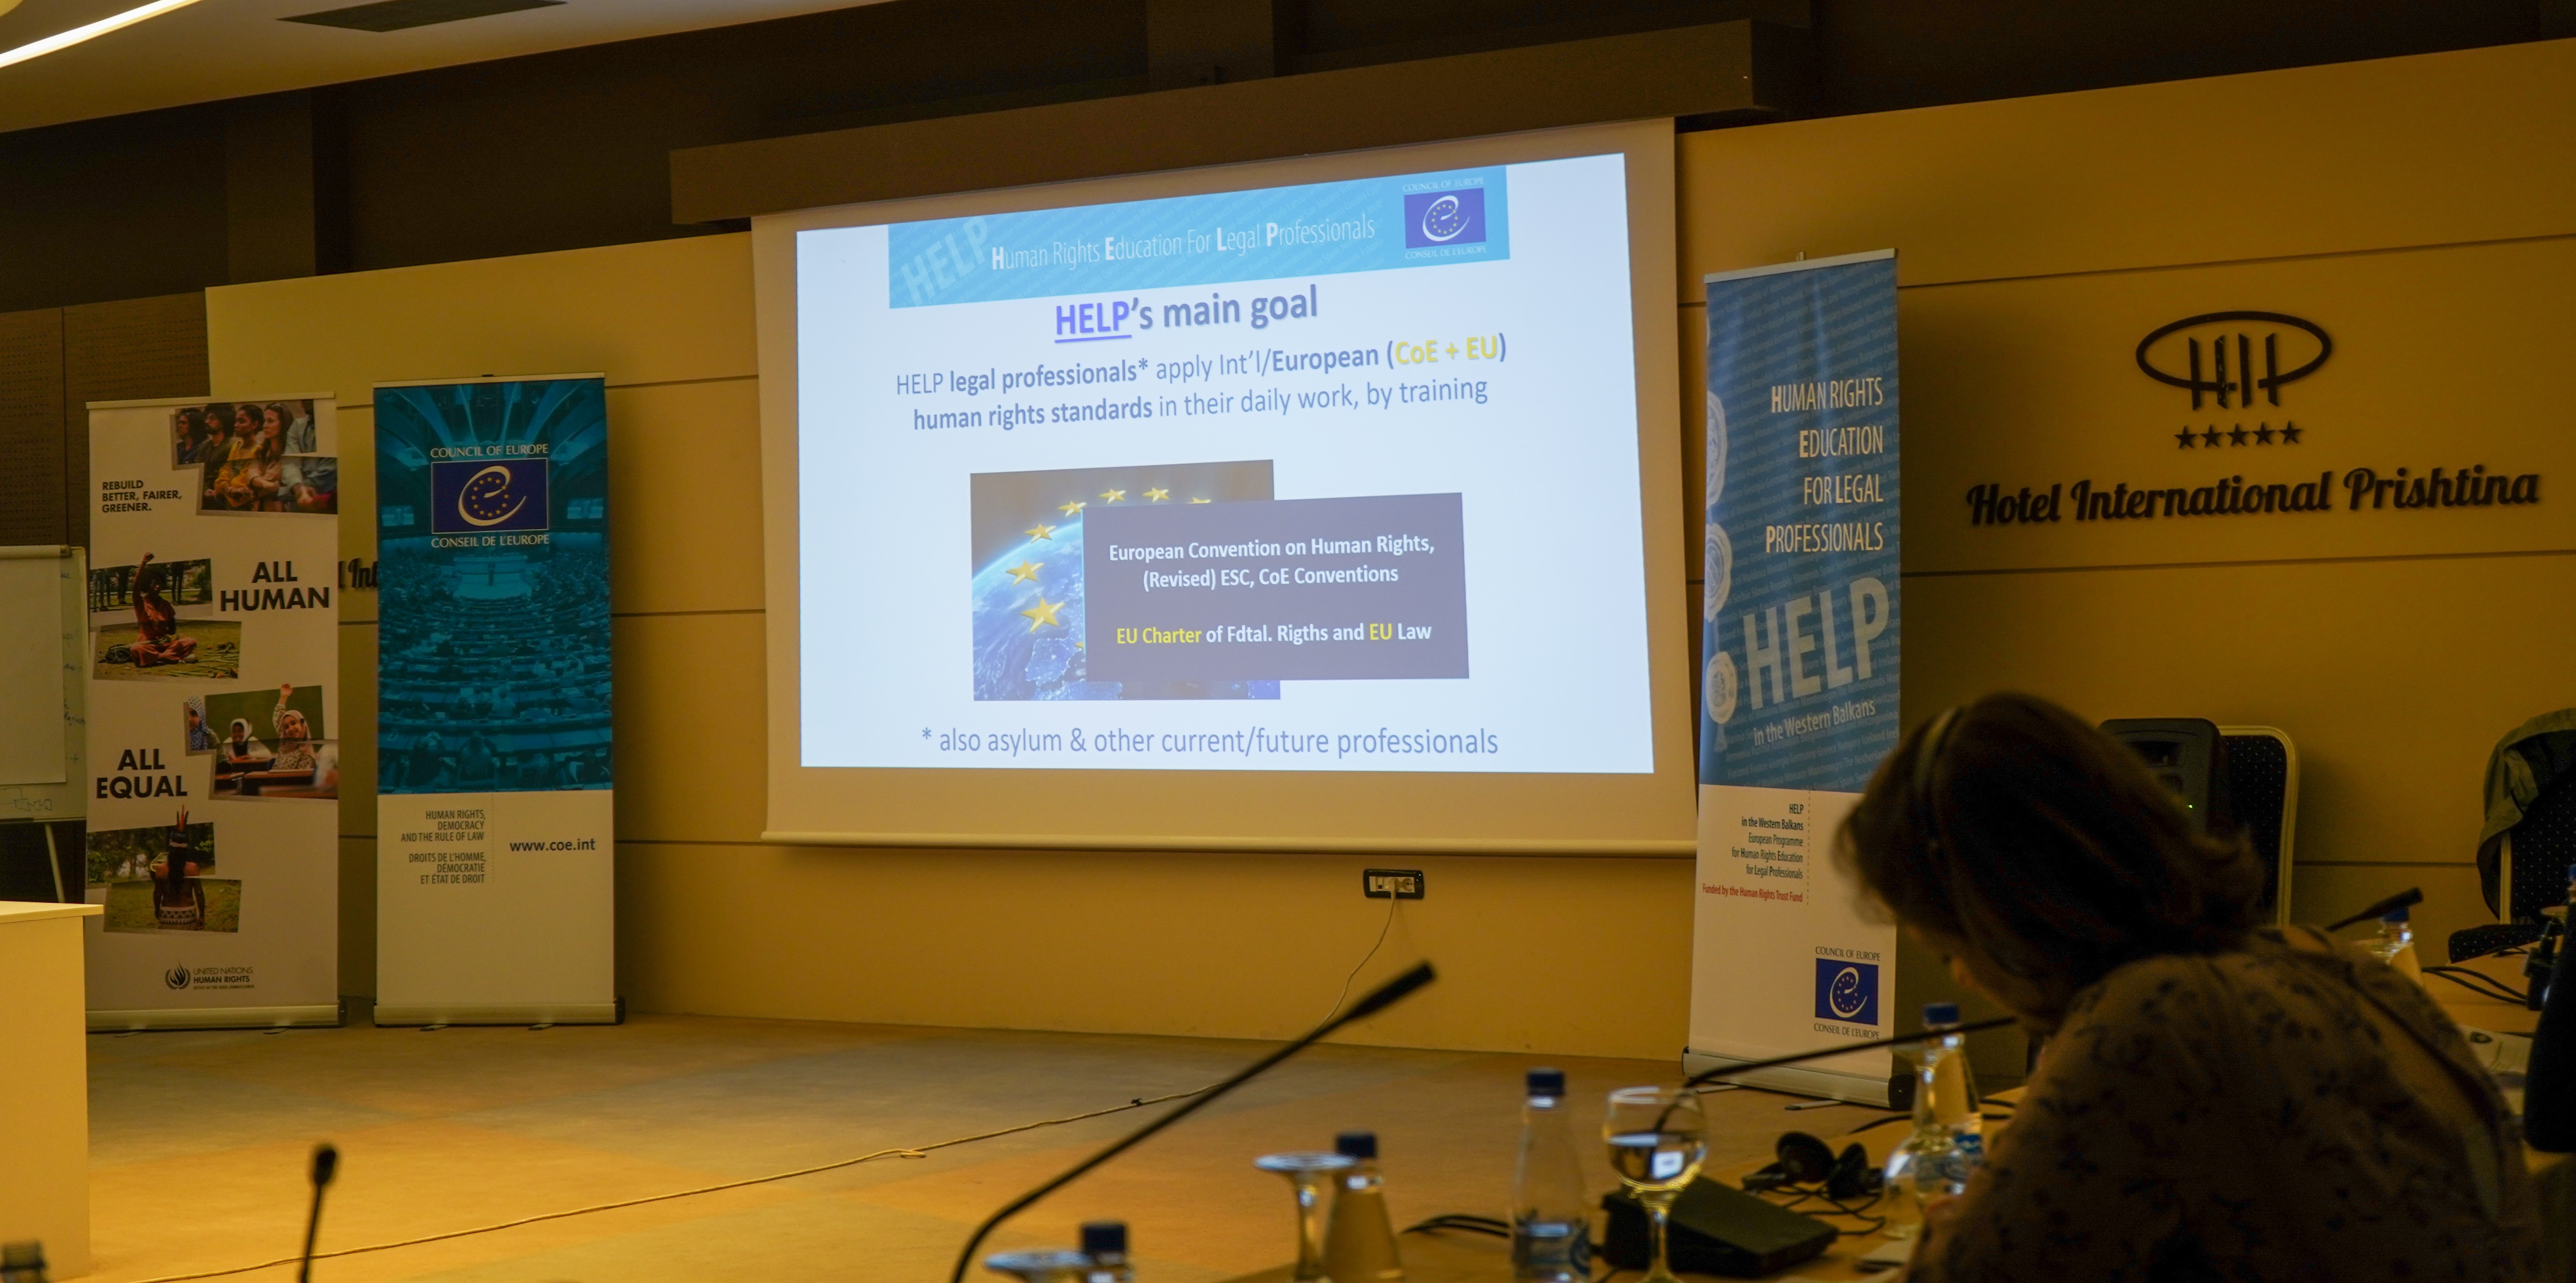 Council of Europe HELP online course on Antidiscrimination launched in Pristina for local civil servants